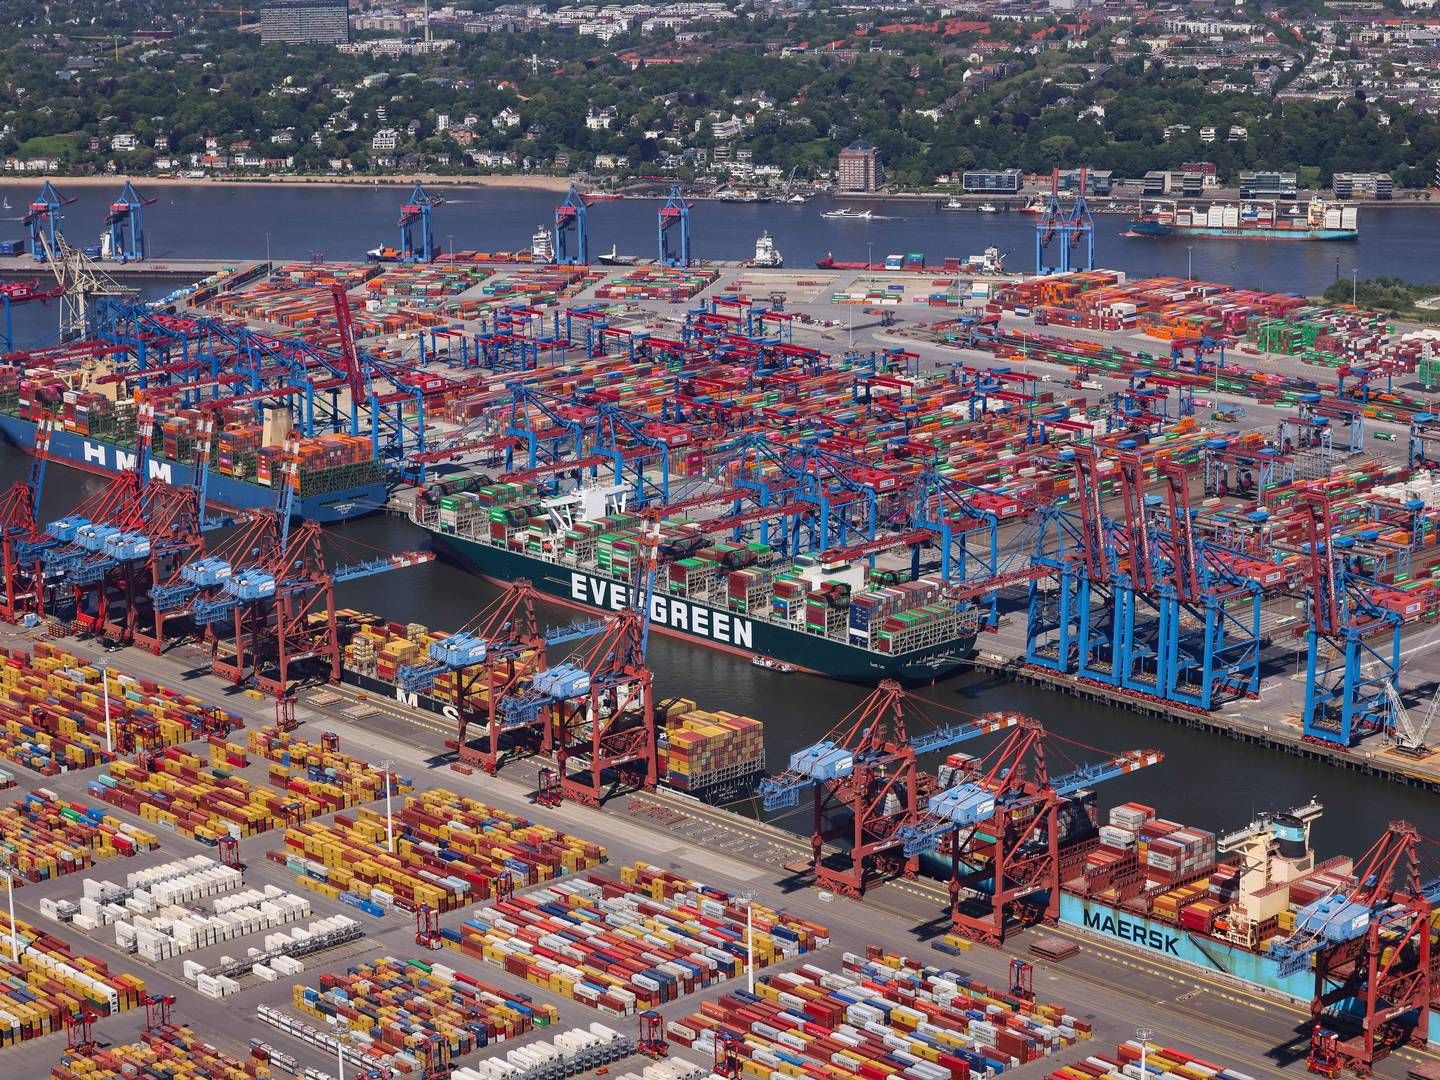 Hanseatic Global Terminals will manage and consolidate terminal and infrastructure investments across 20 terminals in 11 countries, including the Altenwerder terminal in Hamburg.